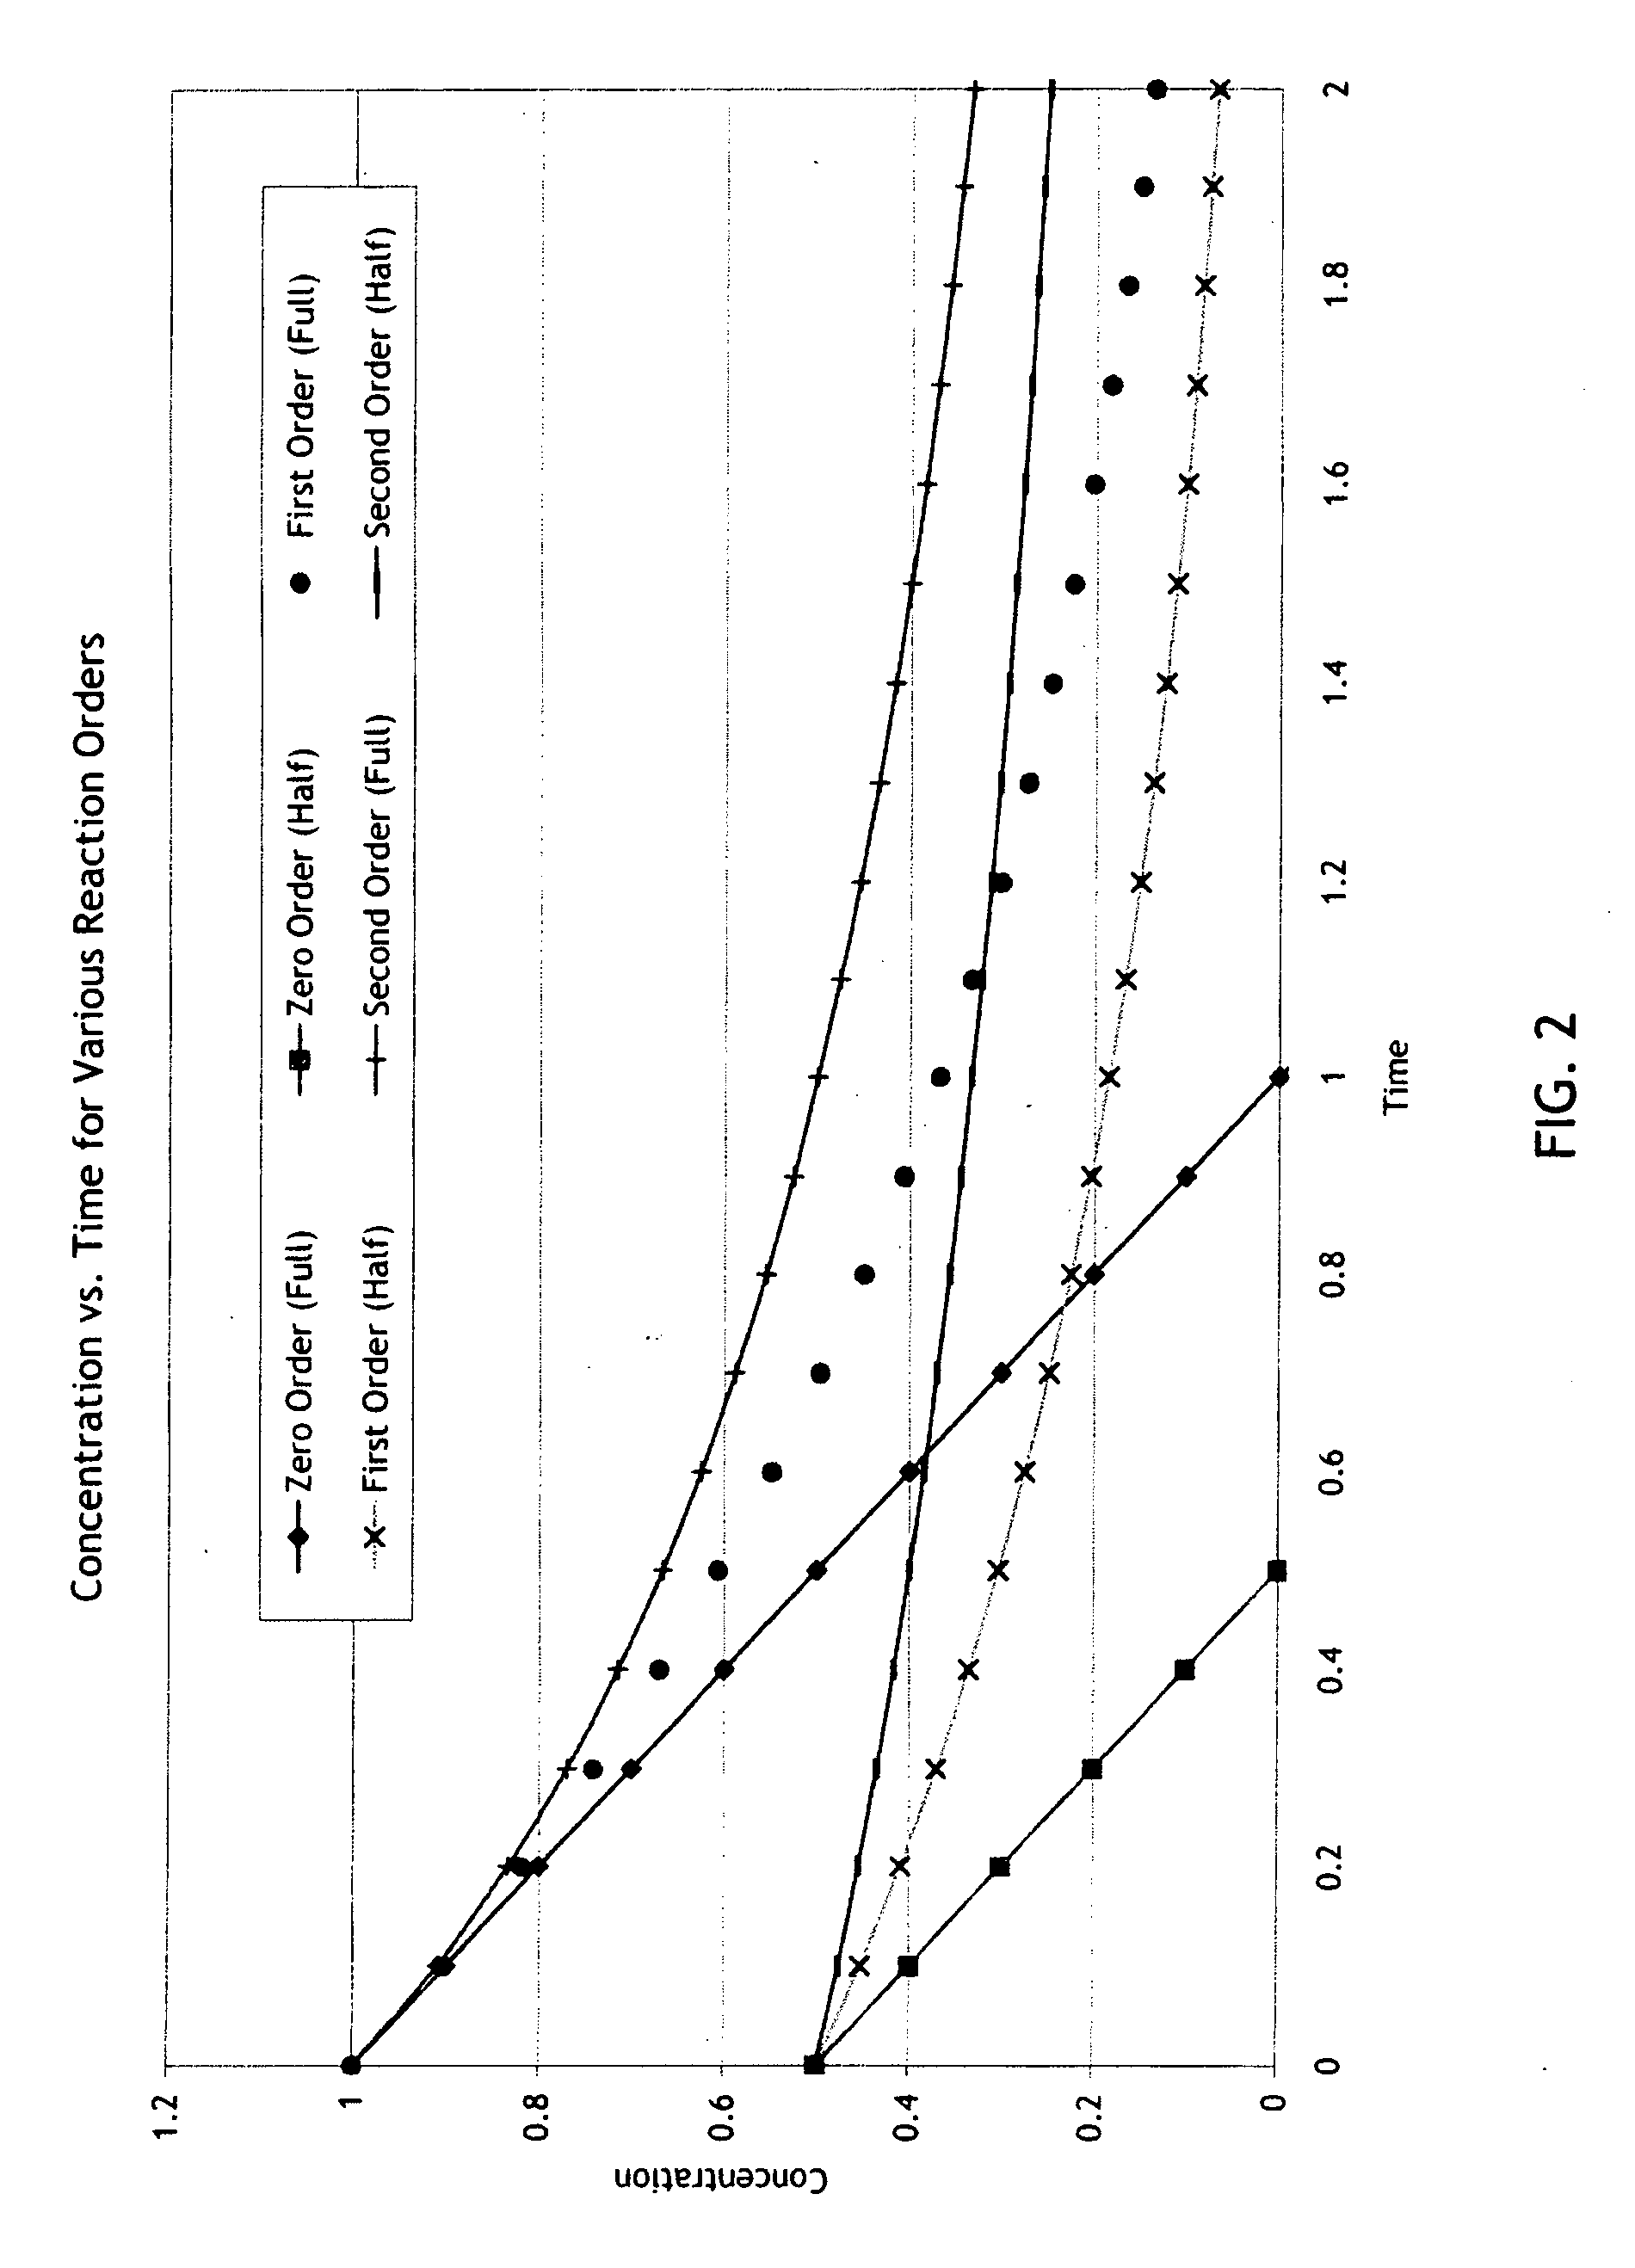 Seasoning and method for seasoning a food product while reducing dietary sodium intake